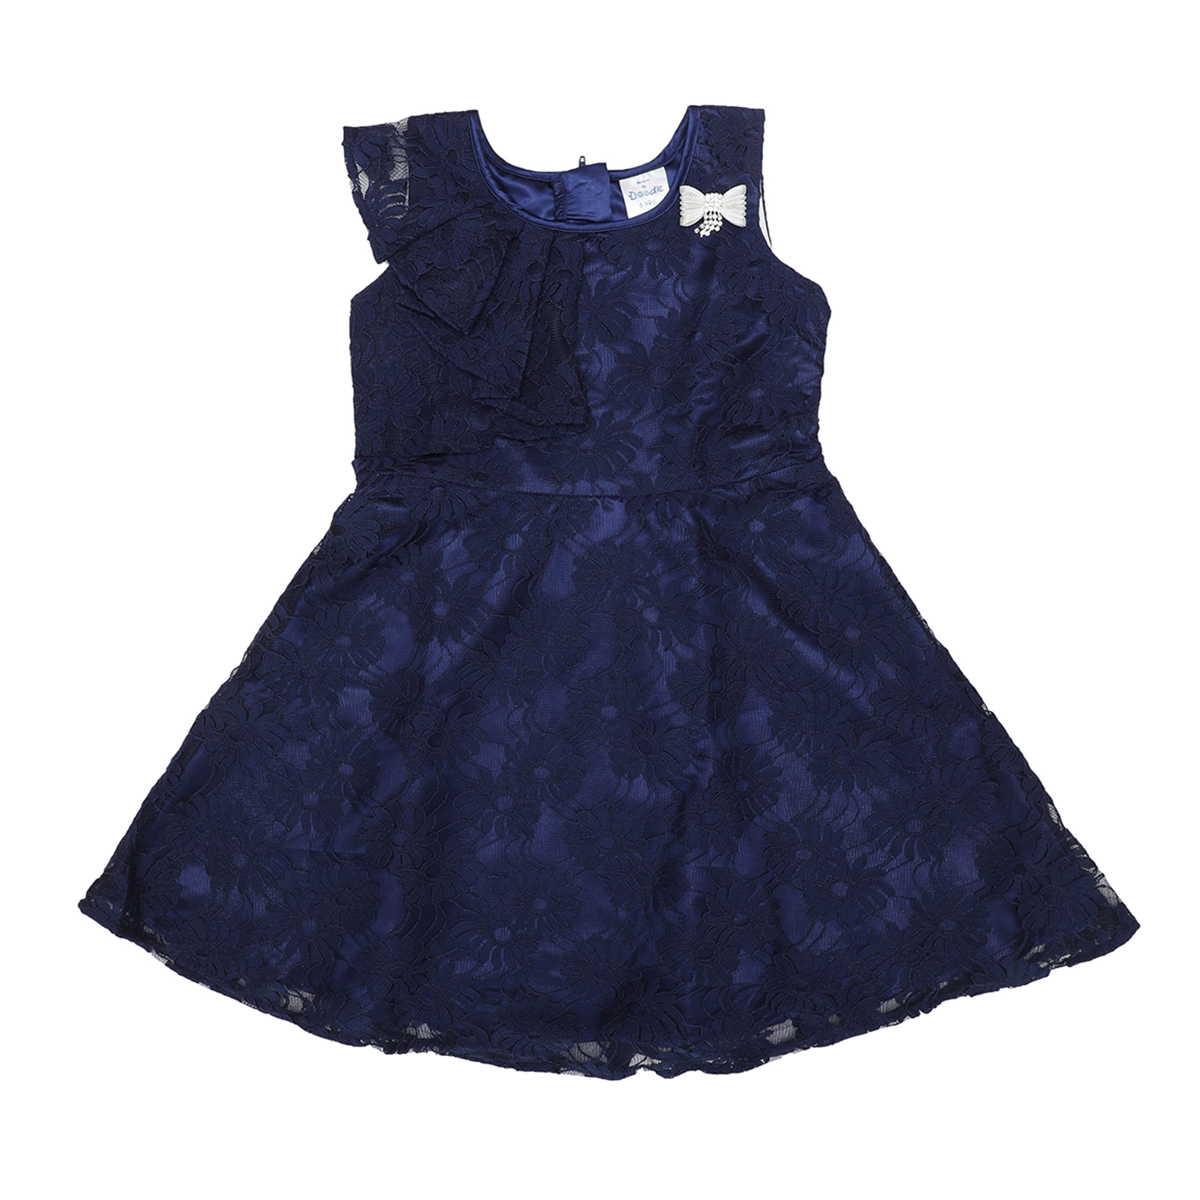 Doodle Girls Midi/Knee Length A-Line Party Dress- Navy- 12Y